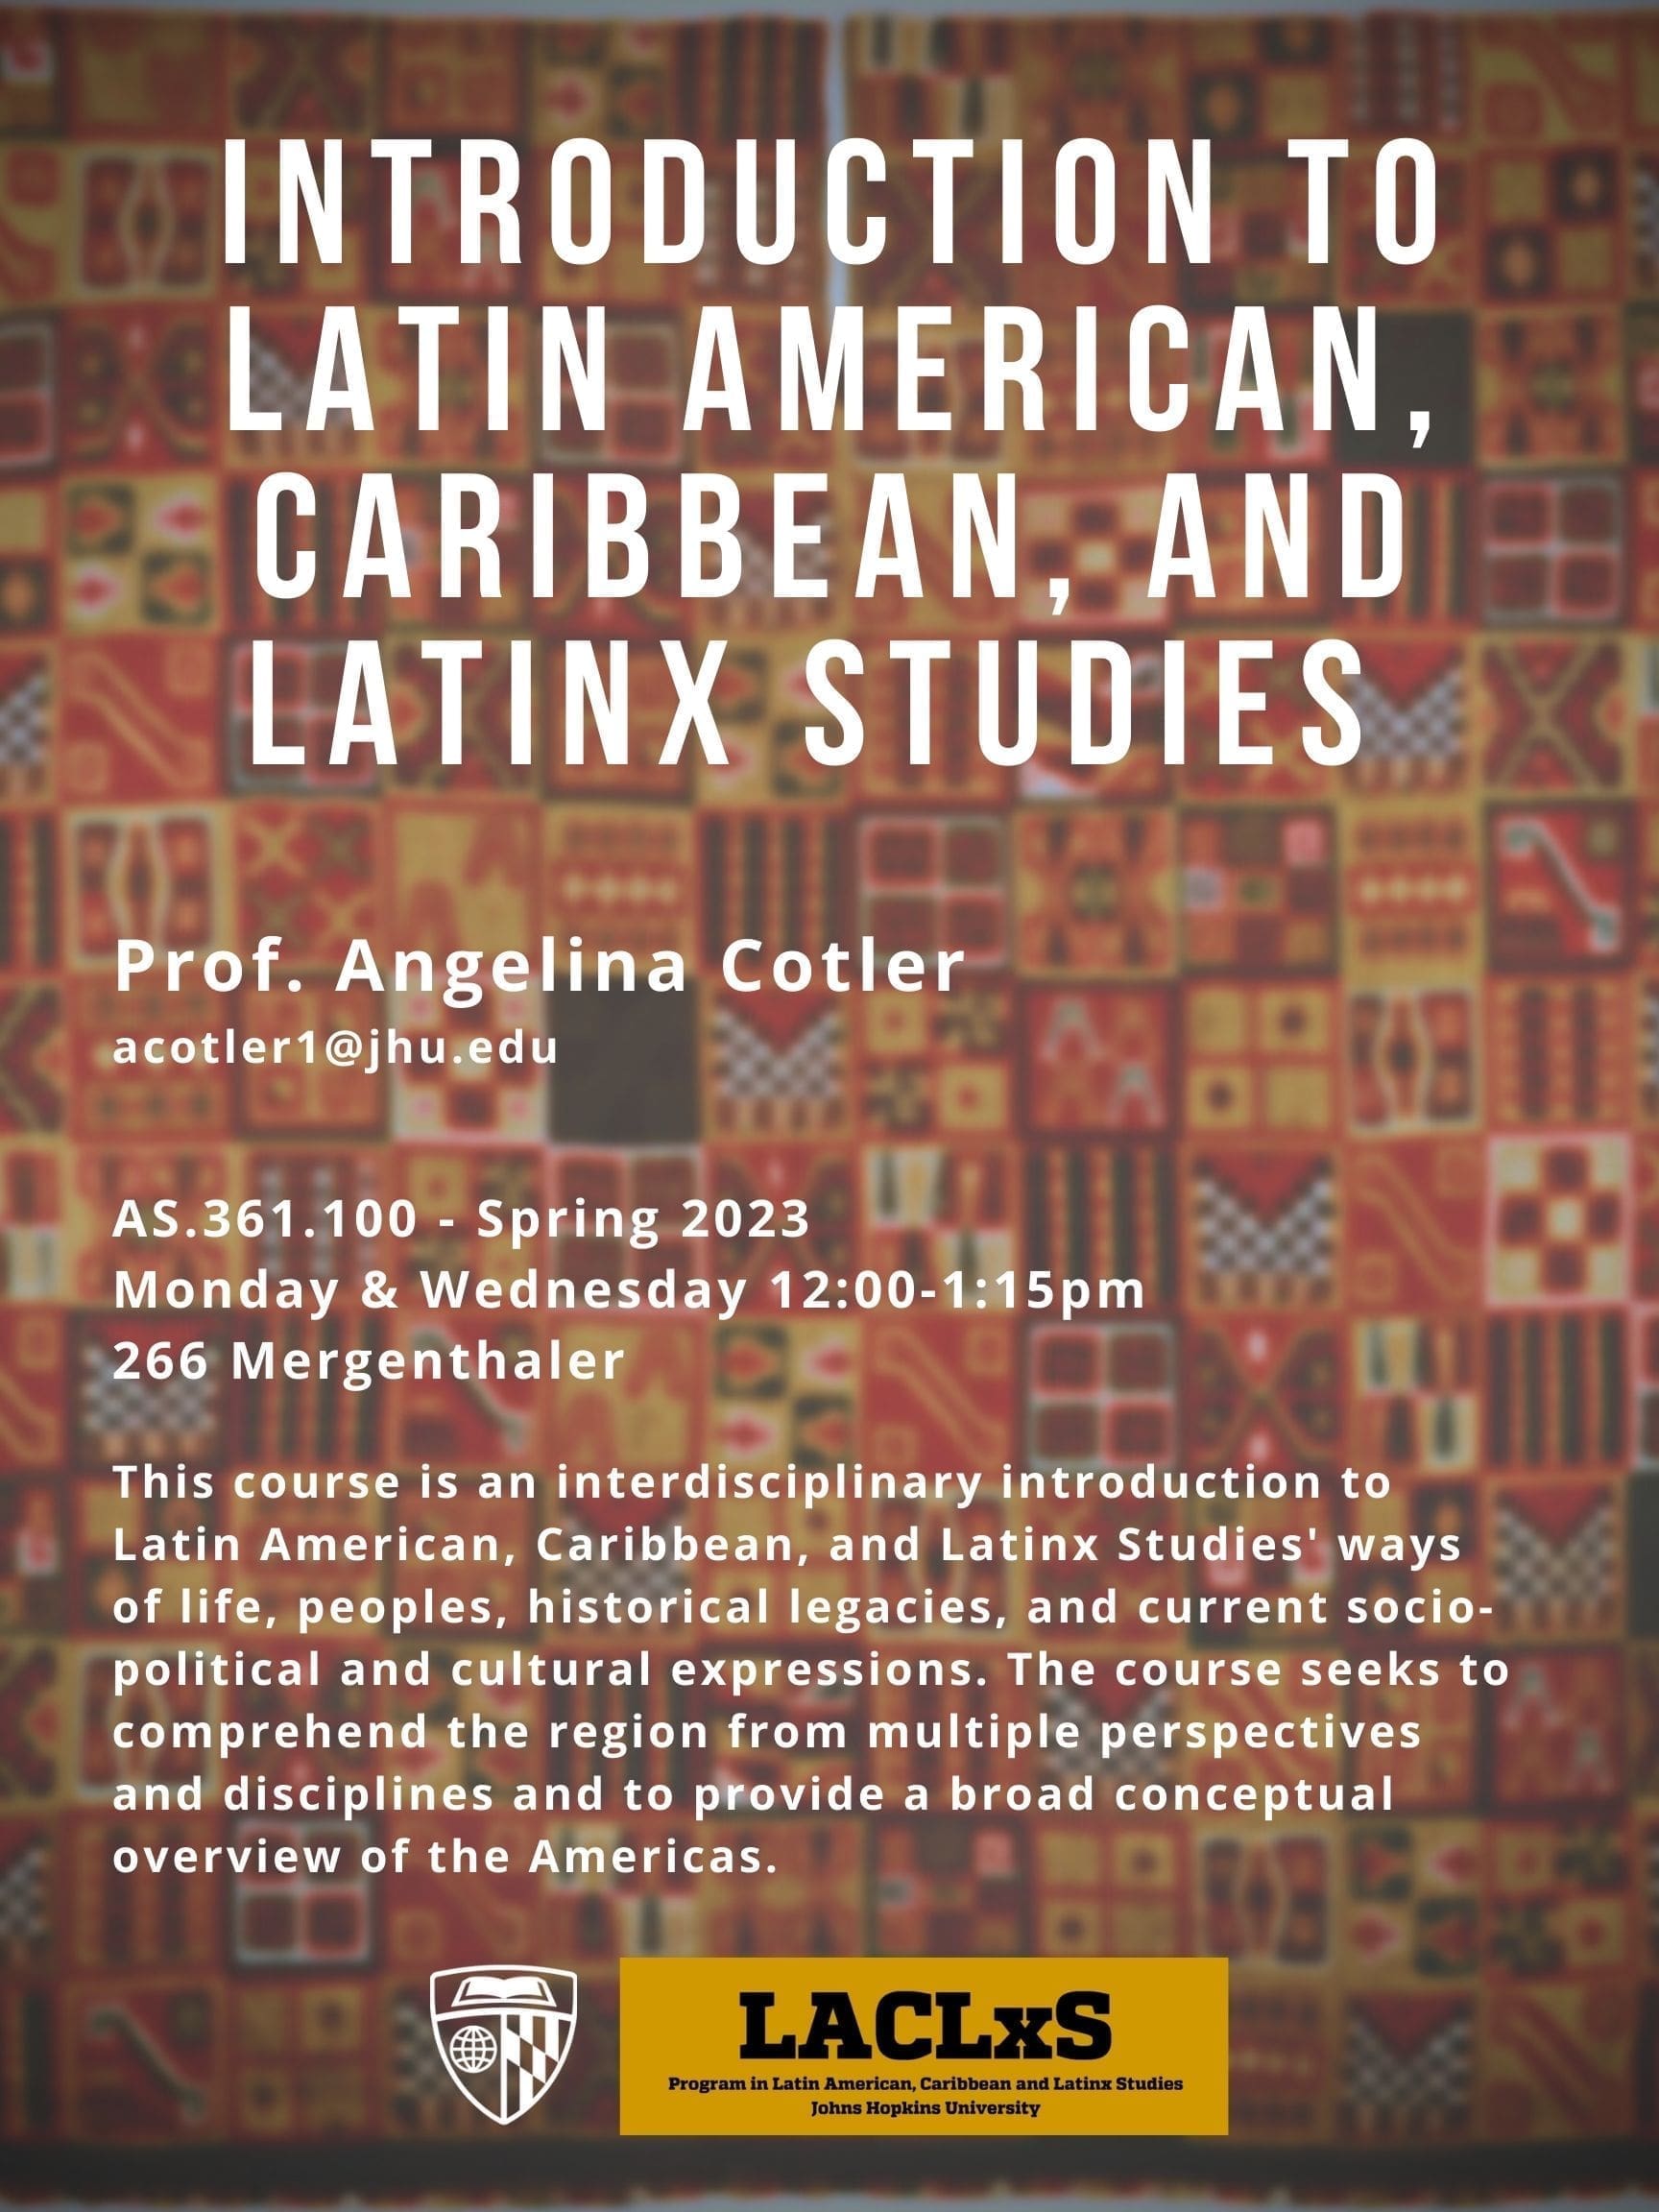 New Course in Spring 2023: Introduction to Latin American, Caribbean, and Latinx Studies